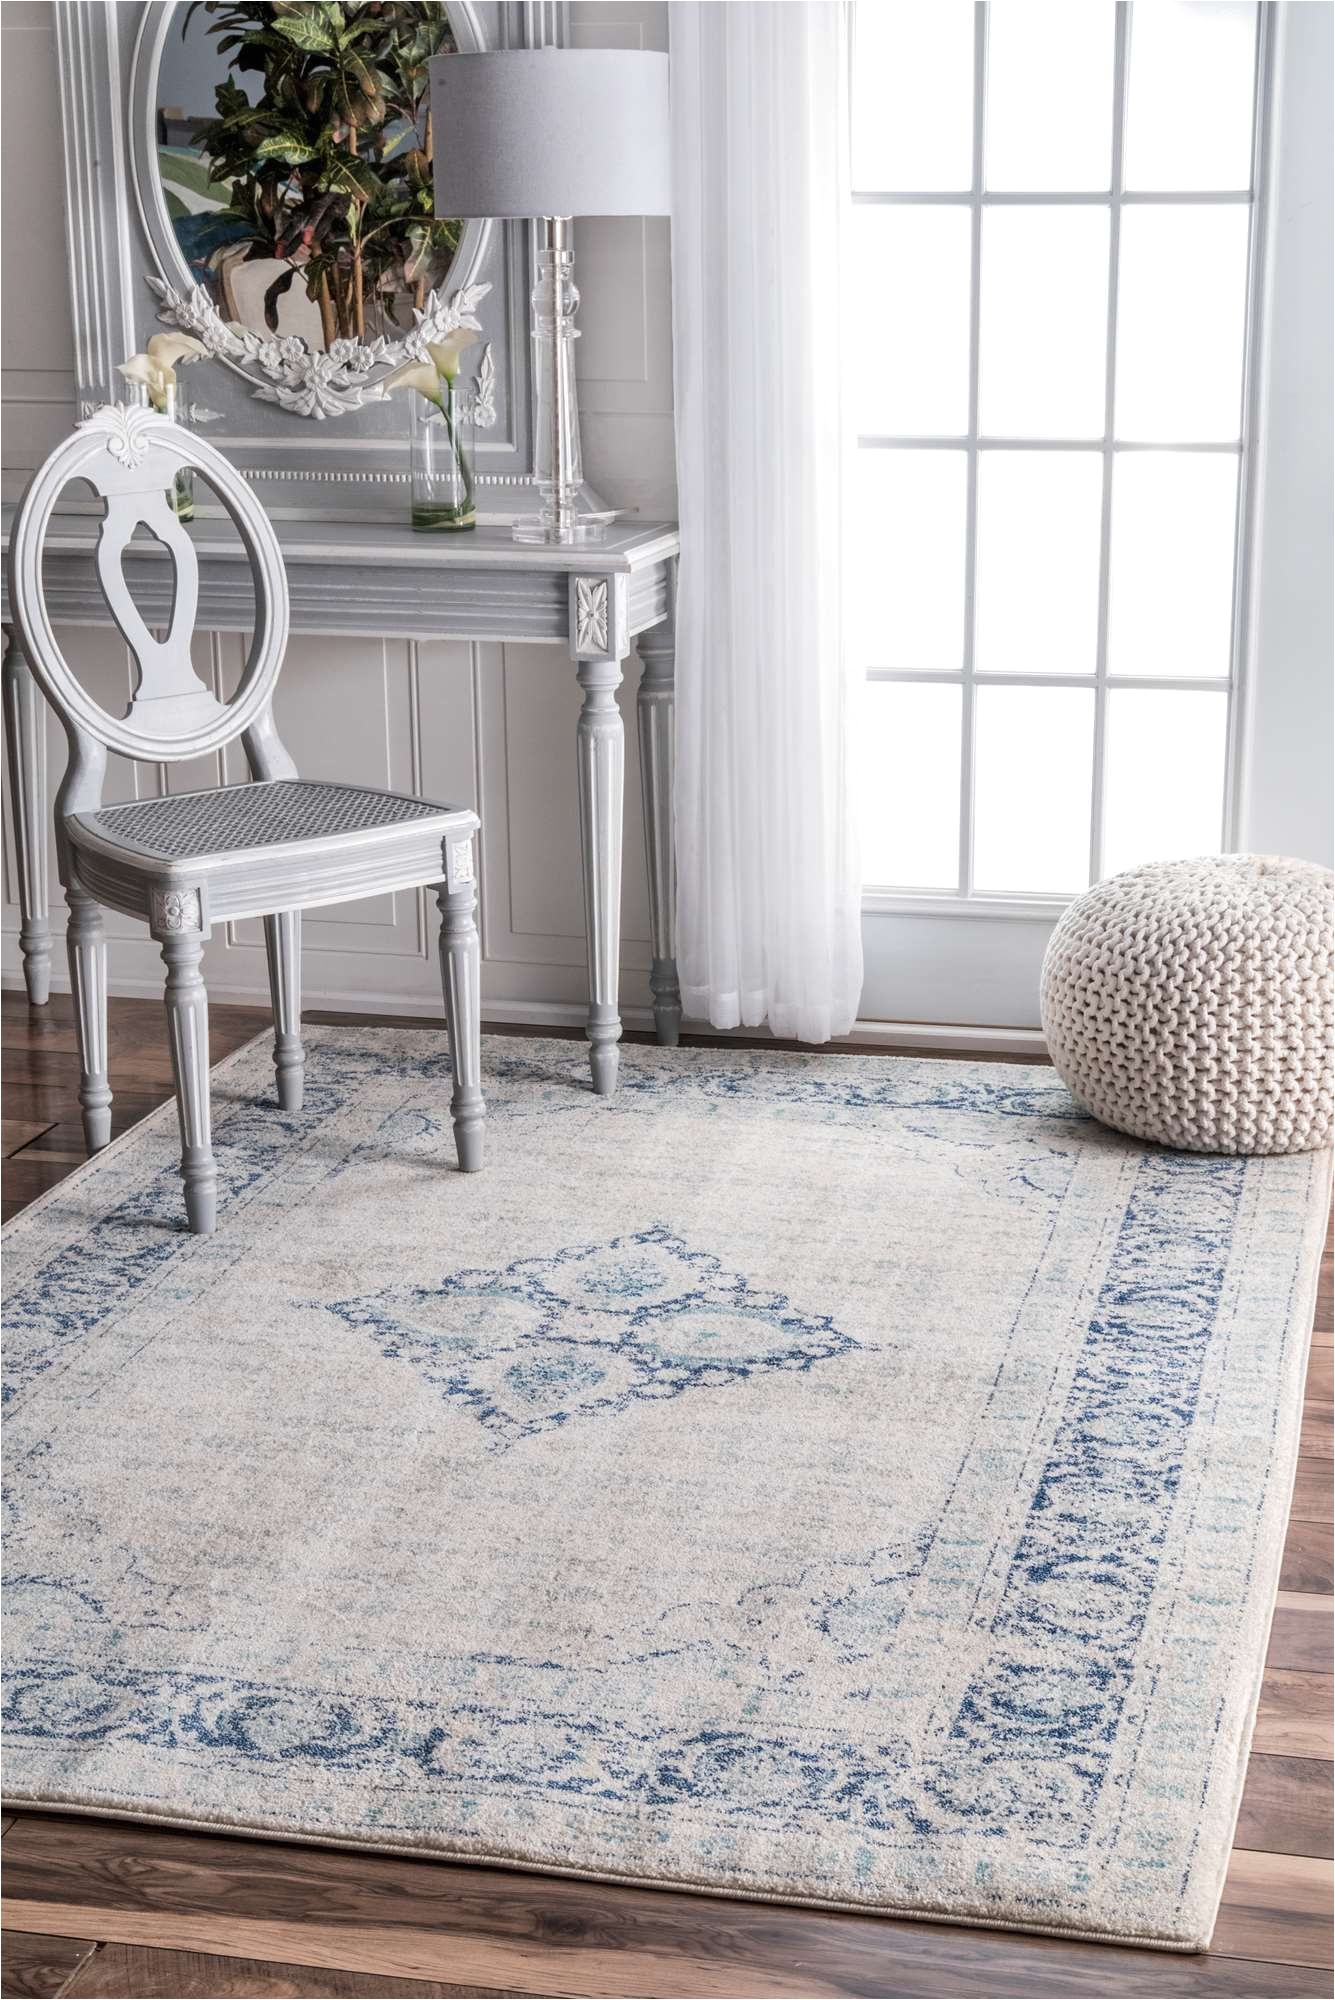 rugs usa area rugs in many styles including contemporary braided outdoor and flokati shag rugs buy rugs at america home decorating superstorearea rugs